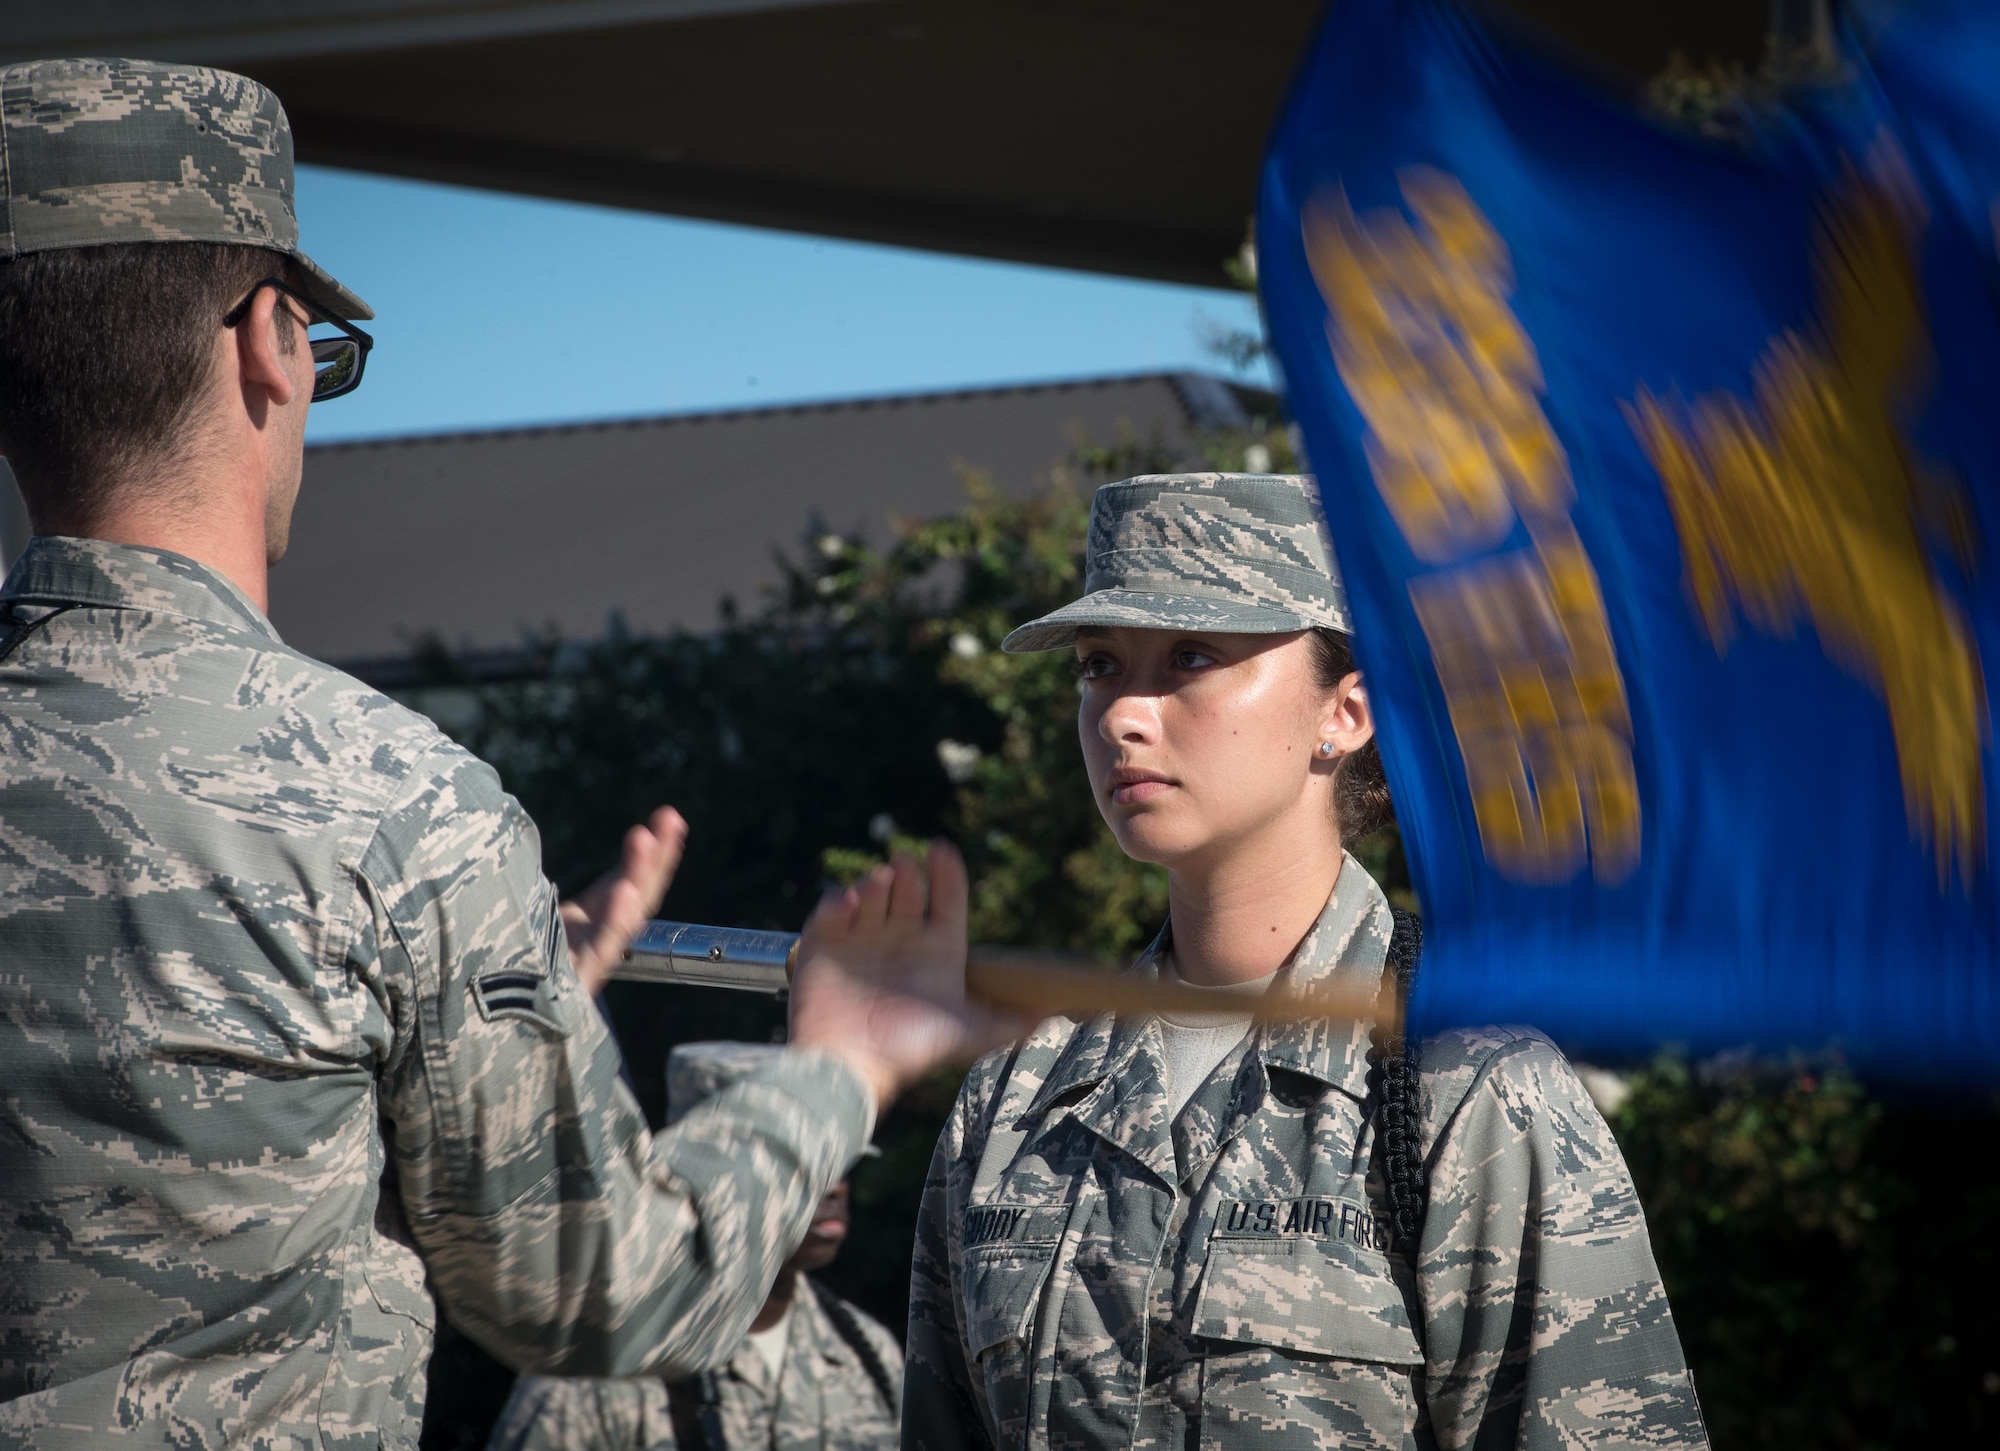 Airman 1st Class Seth Wachman and Airman Basic Kathryn Goody, 336th Training Squadron drill team members, perform during the 81st Training Group drill down at the Levitow Training Support Facility drill pad Sept. 8, 2017, on Keesler Air Force Base, Mississippi. Airmen from the 81st TRG compete in a quarterly open ranks inspection, regulation drill routine and freestyle drill routine. The 334th TRS “Gators” took first place this quarter. (U.S. Air Force photo by Tech. Sgt. Ryan Crane)